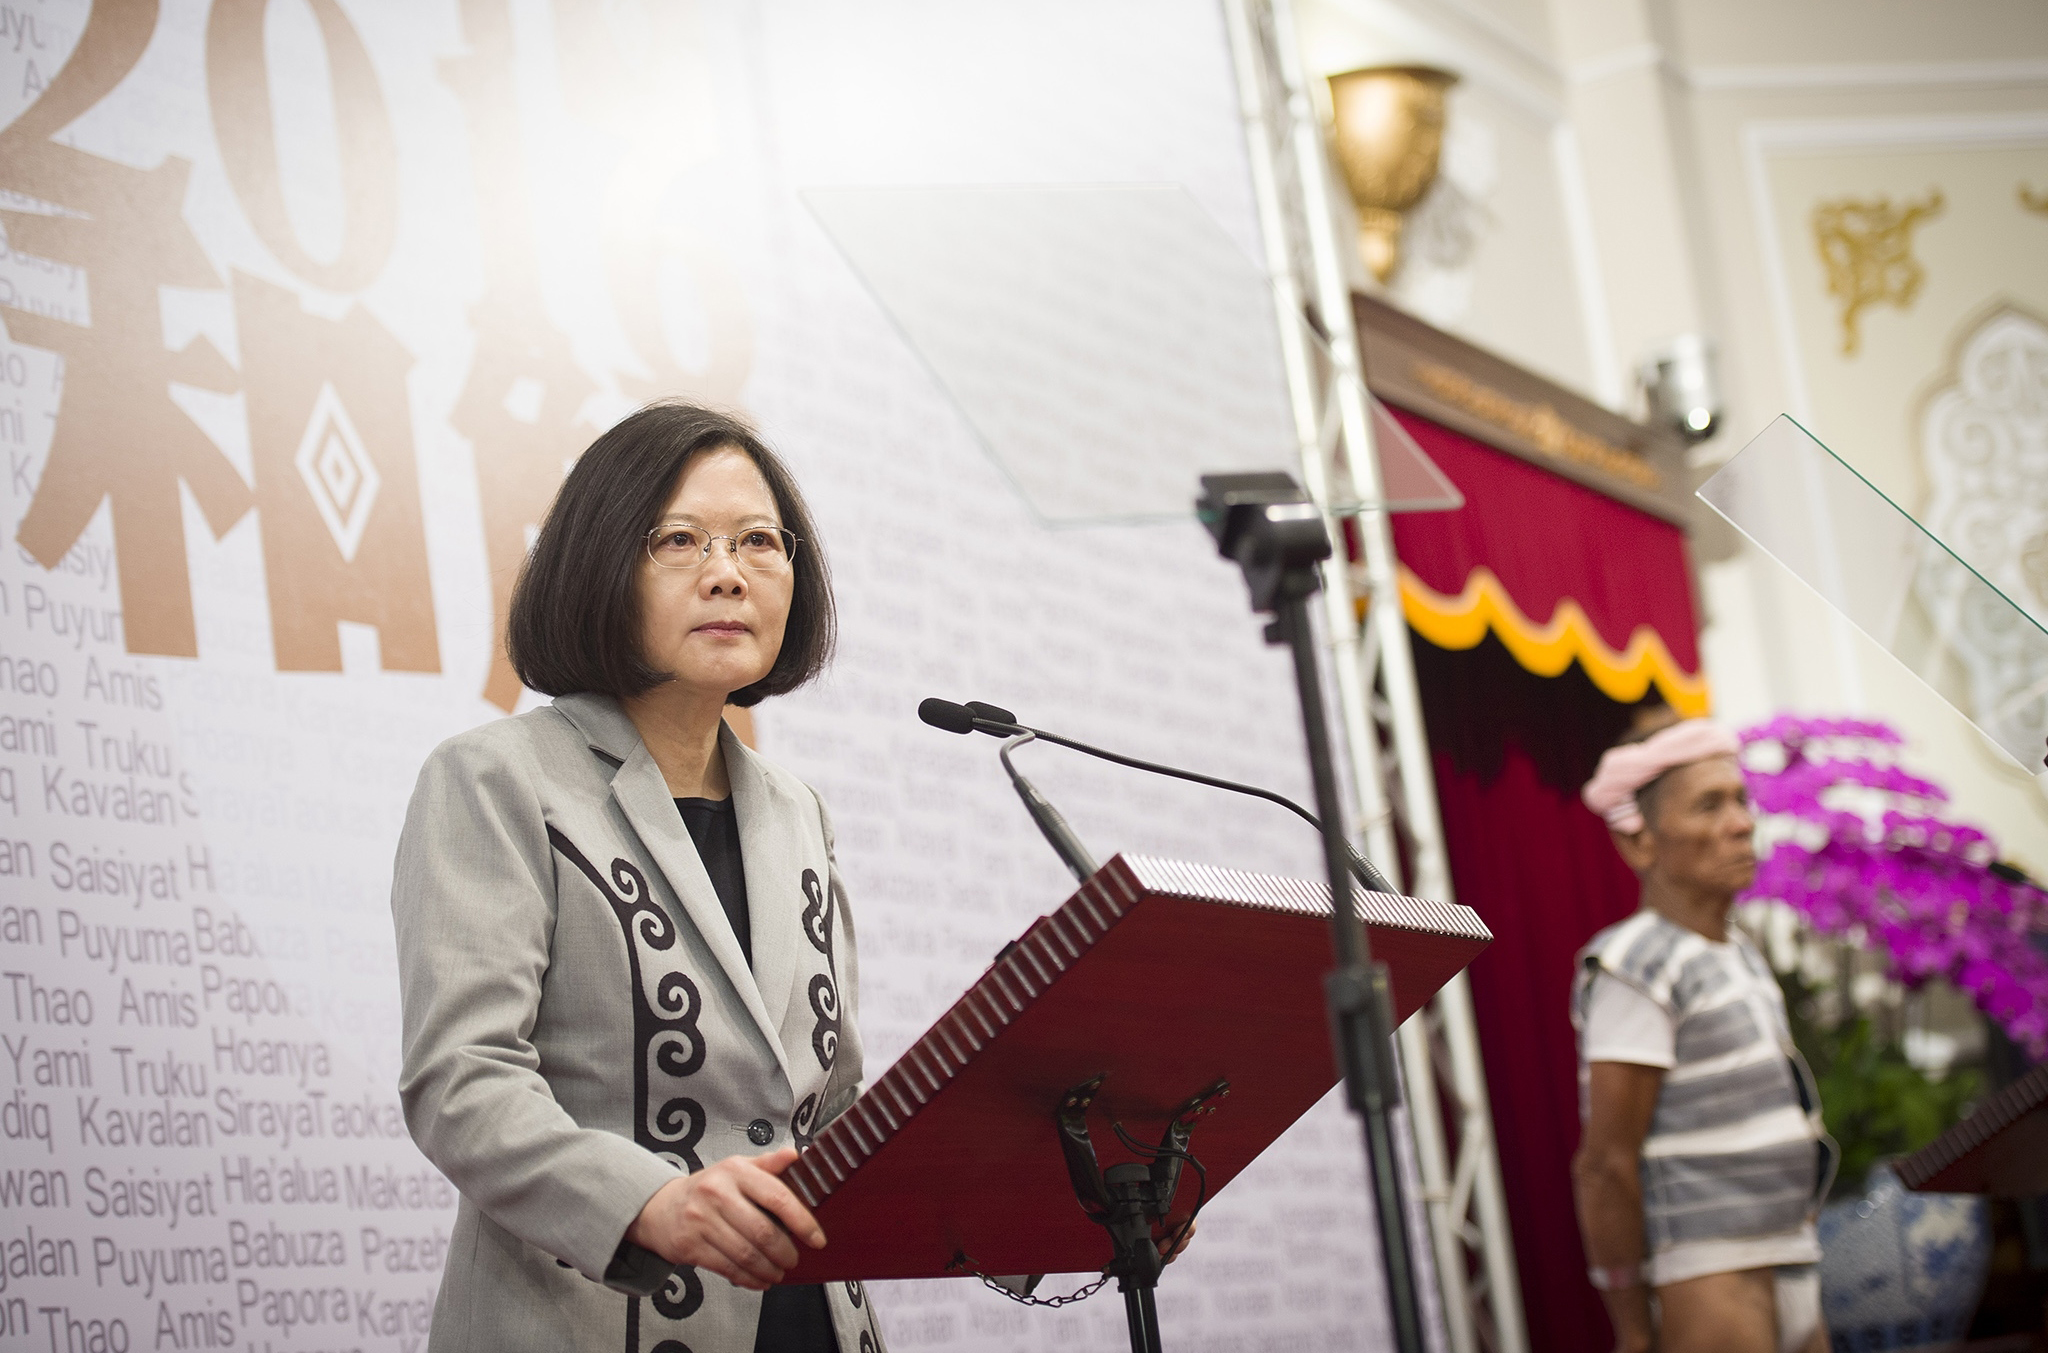 President Tsai Ing-wen apologized on behalf of the government to Taiwan's indigenous peoples